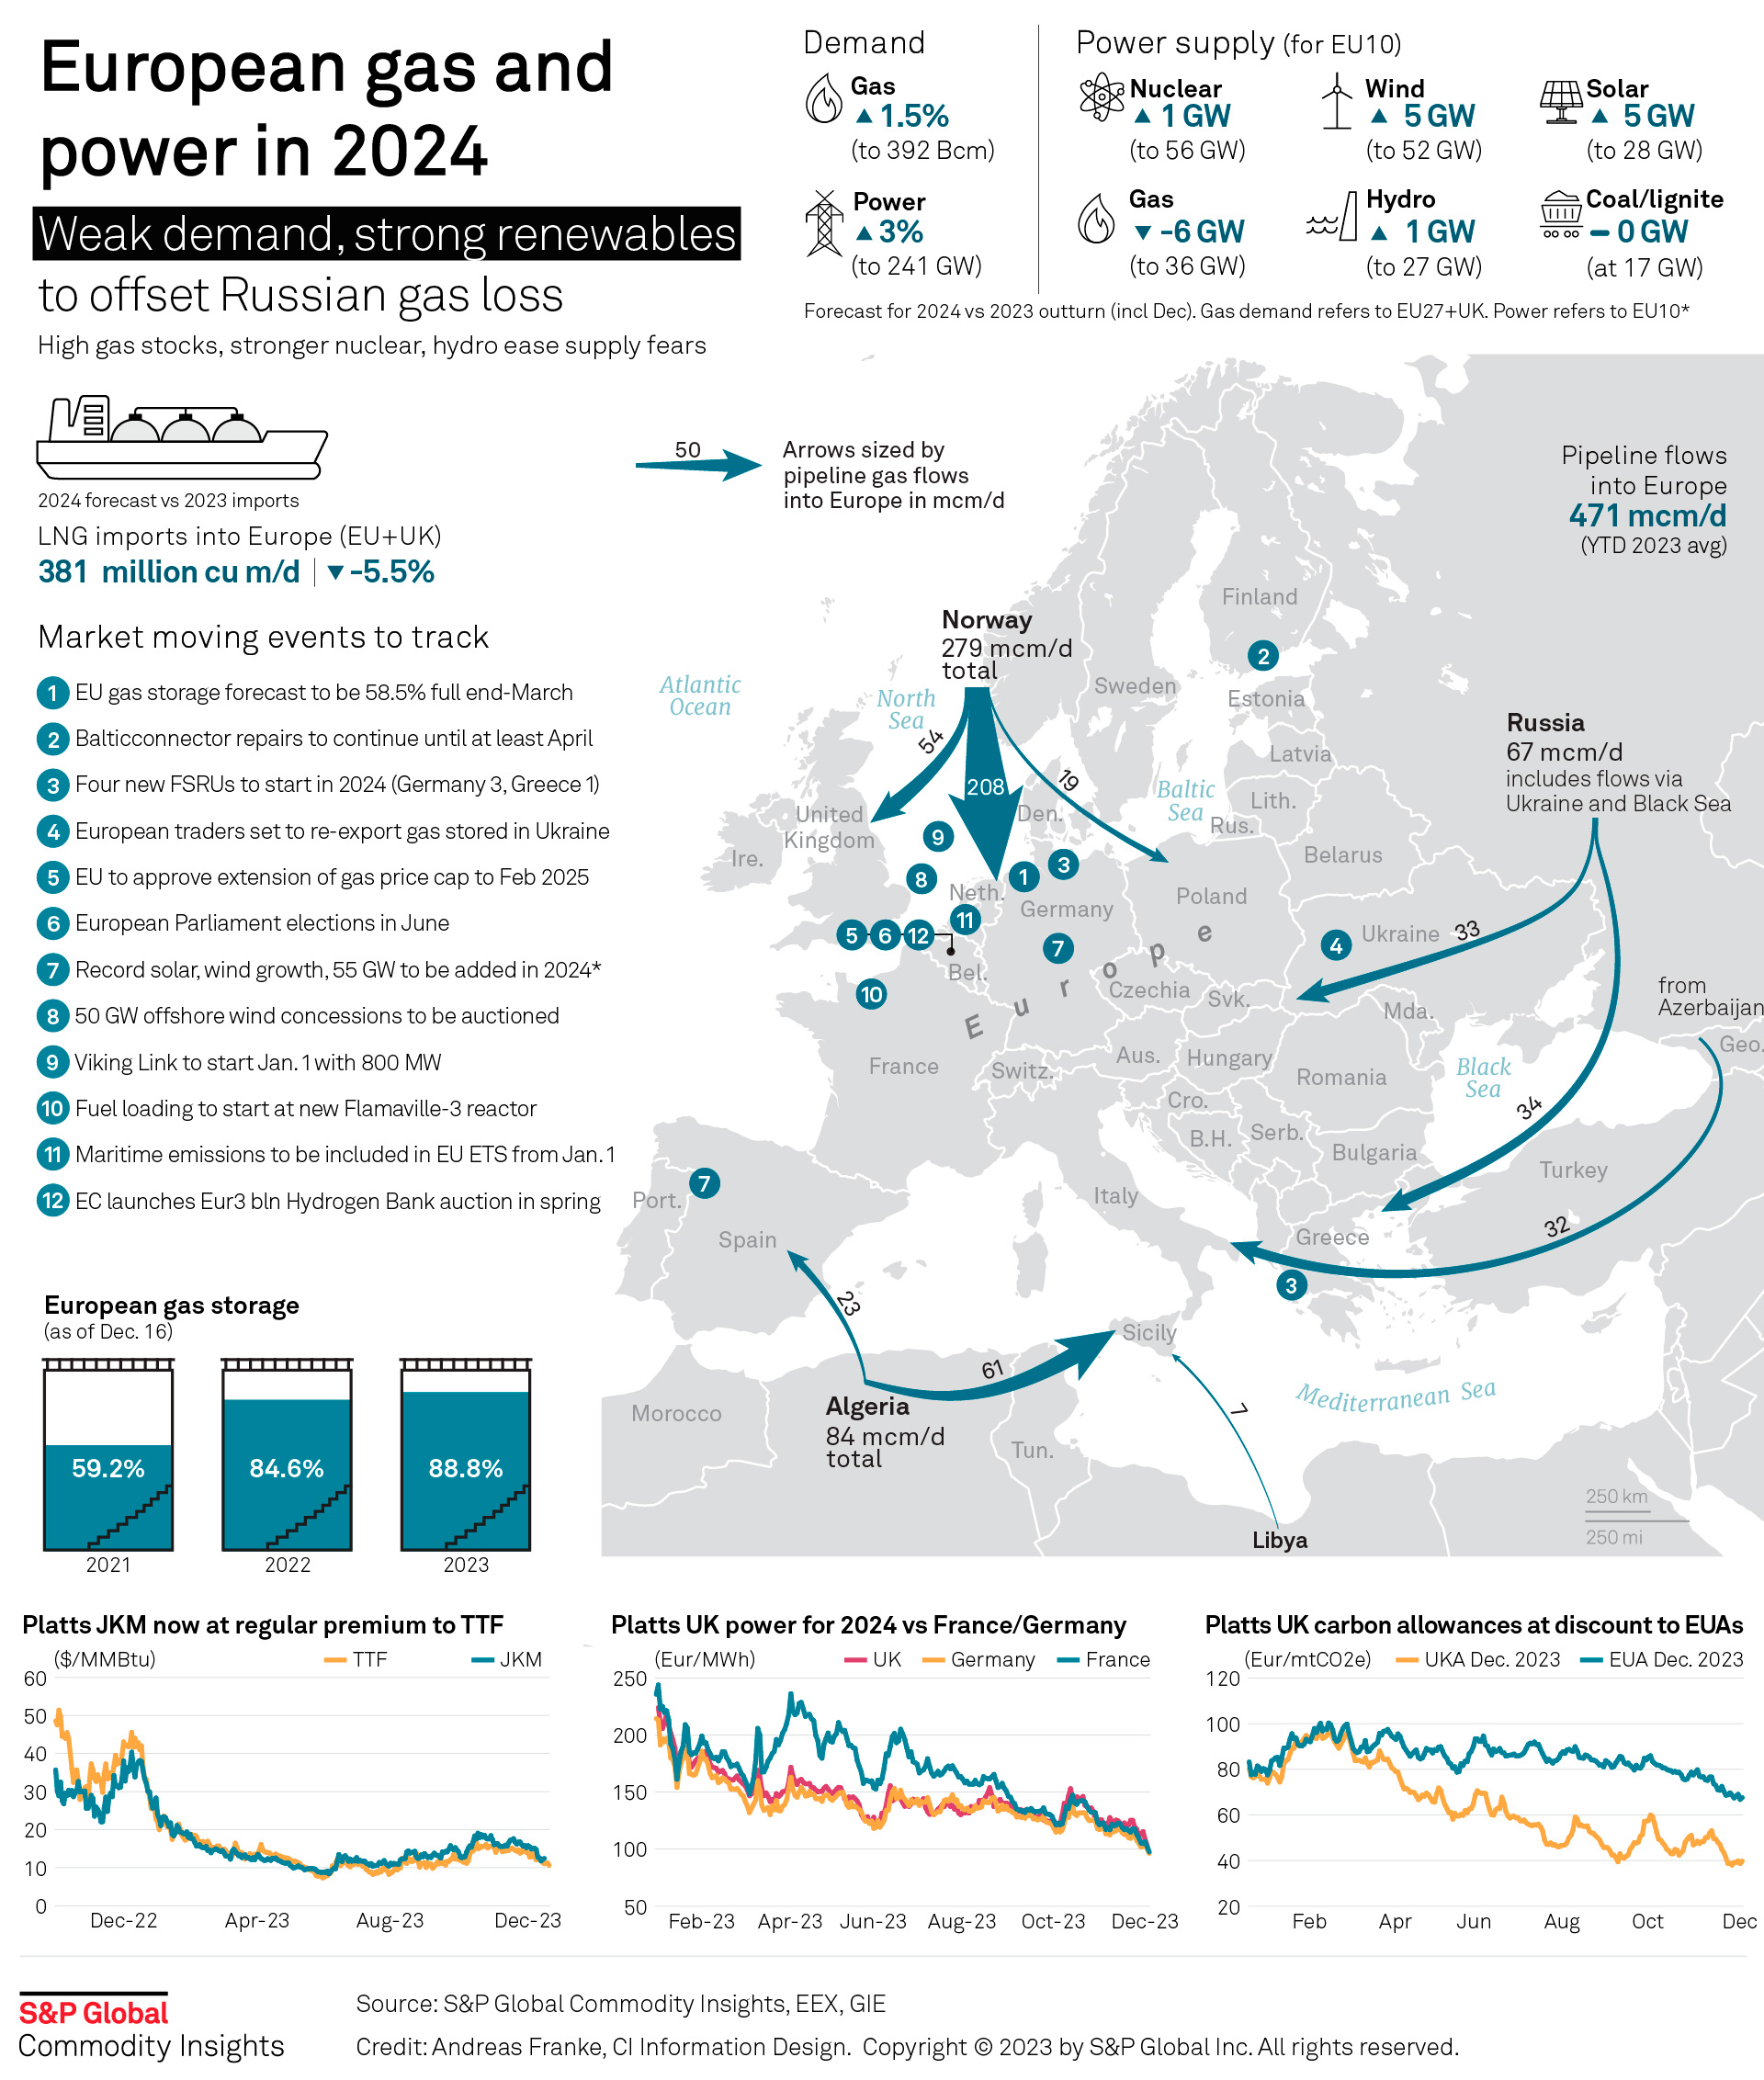 Infographic showing European gas and power markets in 2024. Weak growth in gas and power demand and strong renewable generation are expected to offset the loss of Russian gas supply.